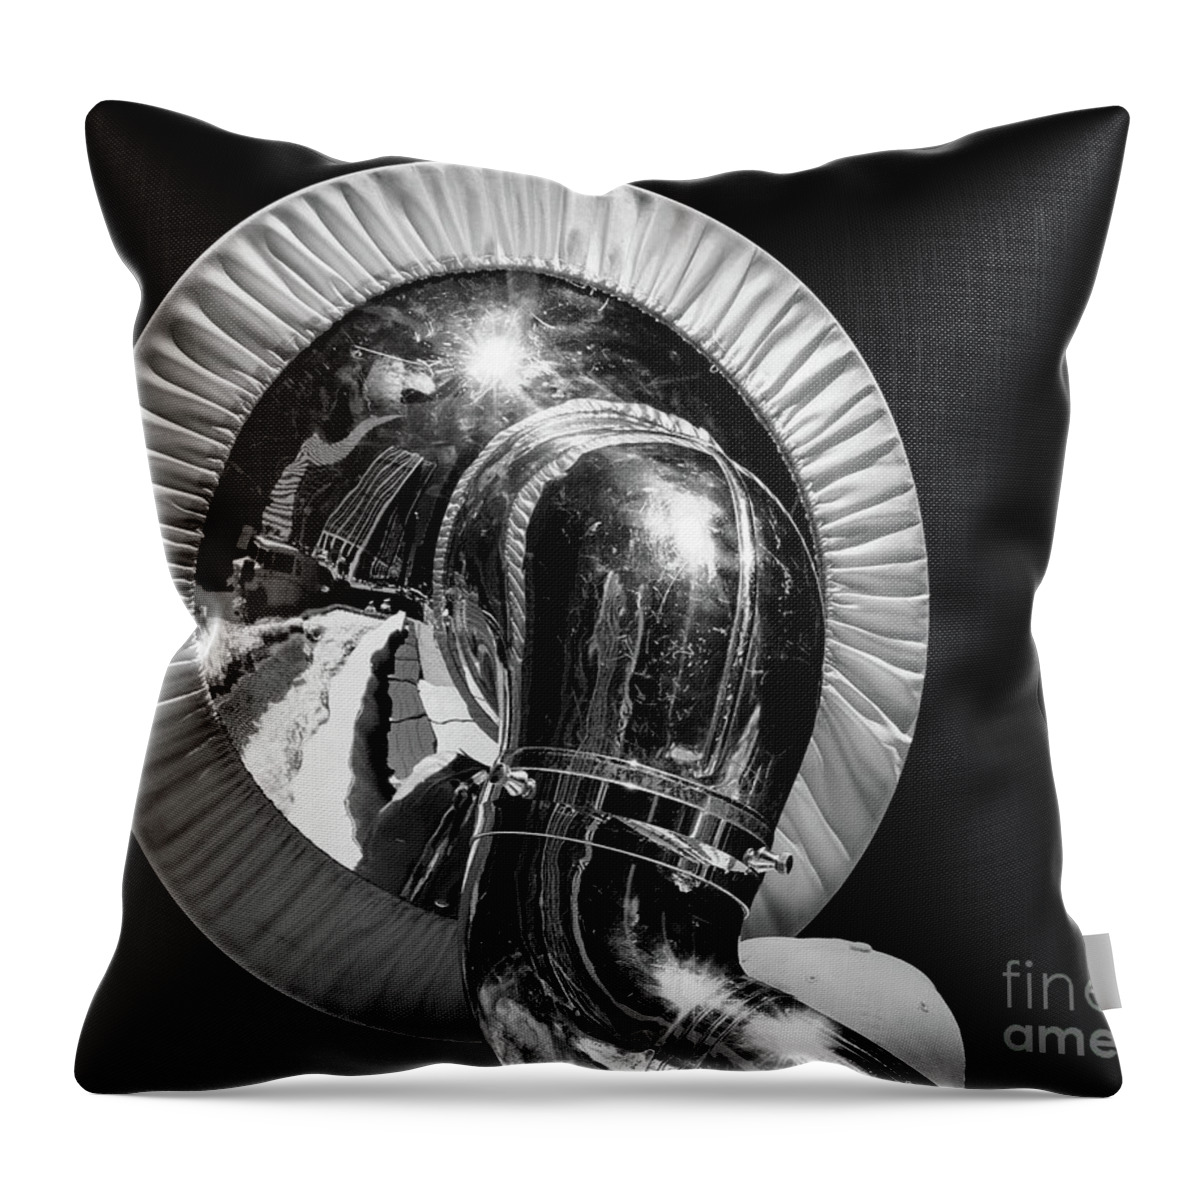 Chicago Throw Pillow featuring the photograph Music man by Izet Kapetanovic